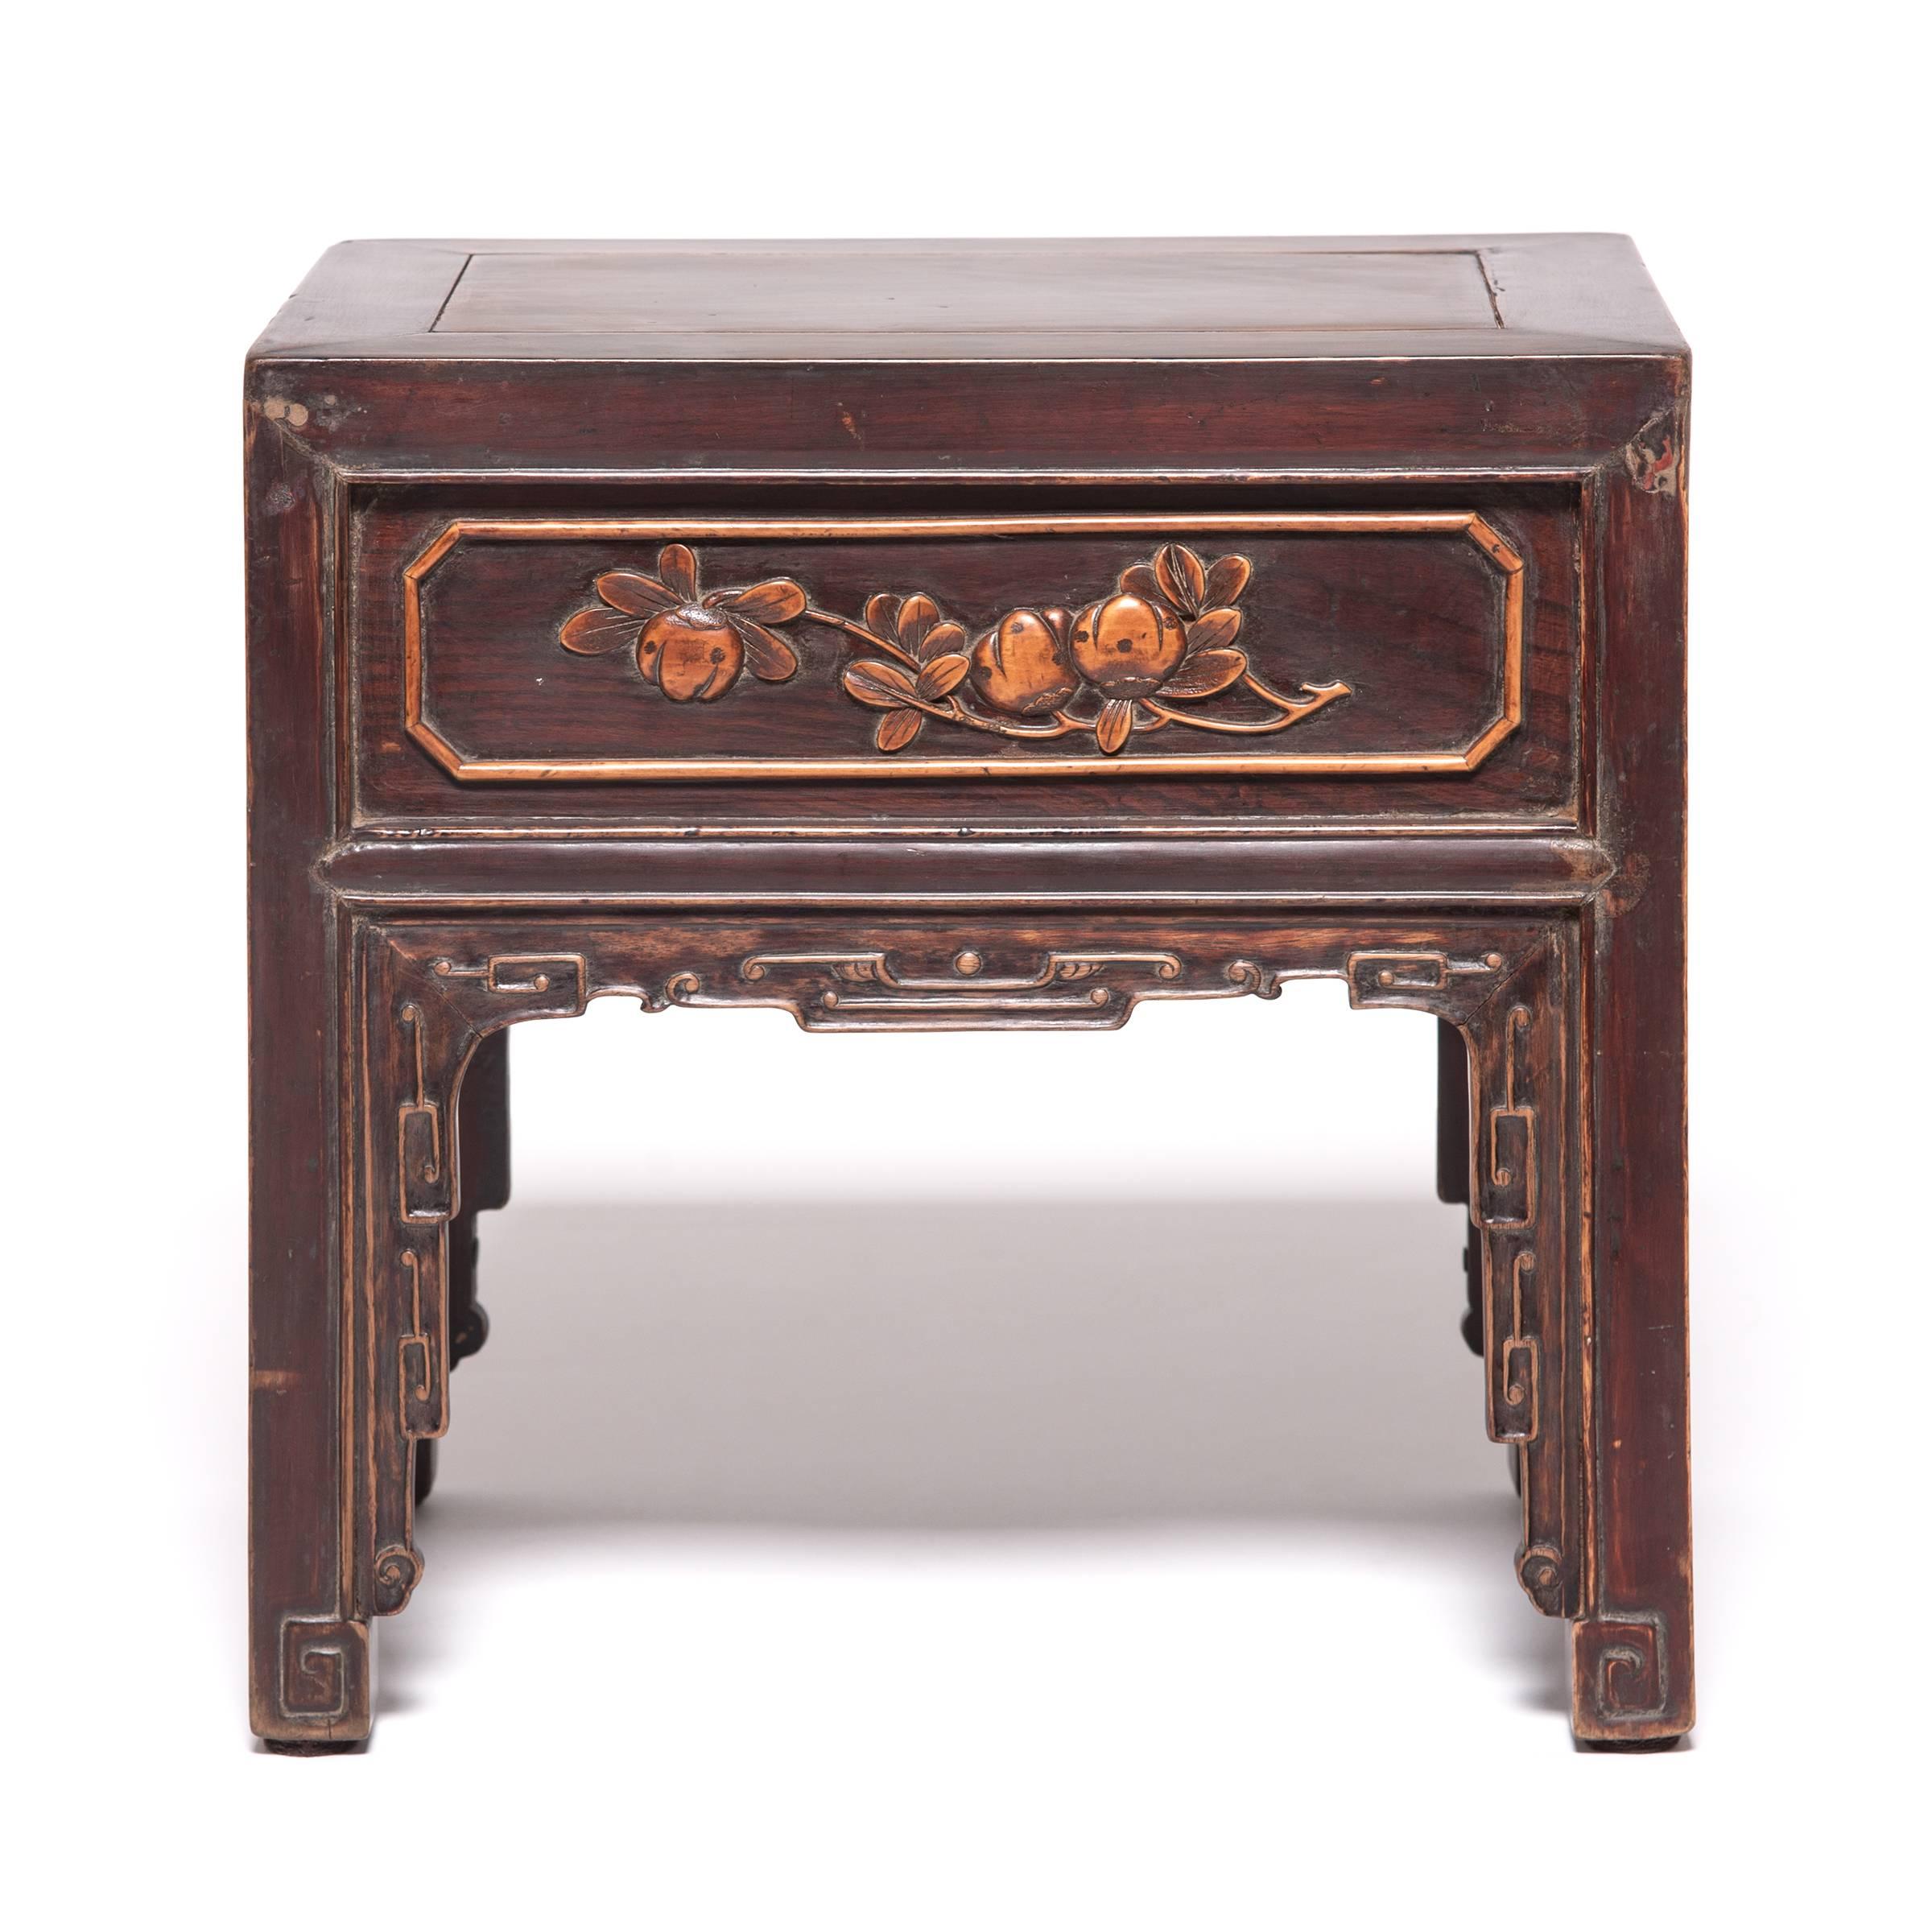 Qing Petite Chinese Display Table with Boxwood Inlay, c. 1850